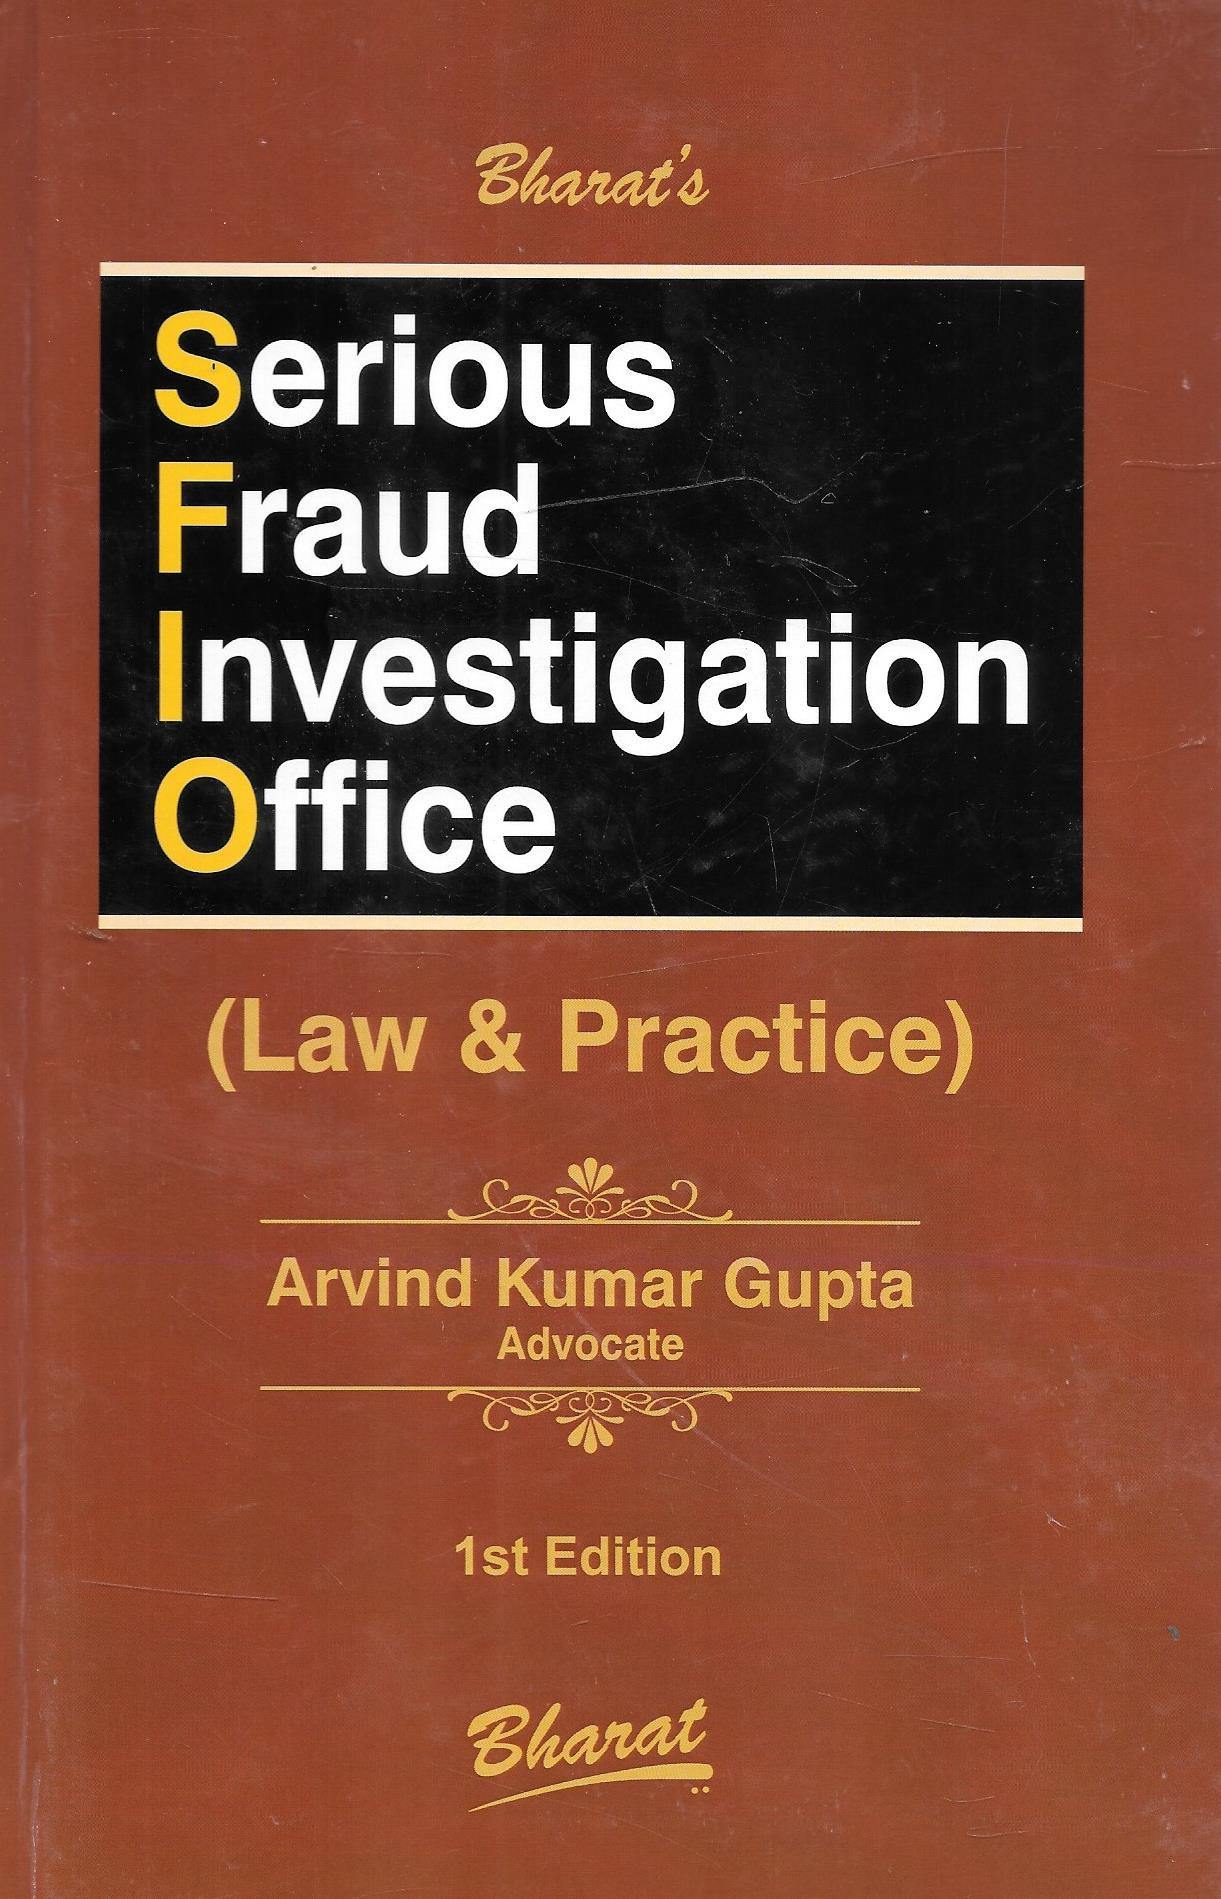 Serious Fraud Investigation Office (Law & Practice) - M&J Services